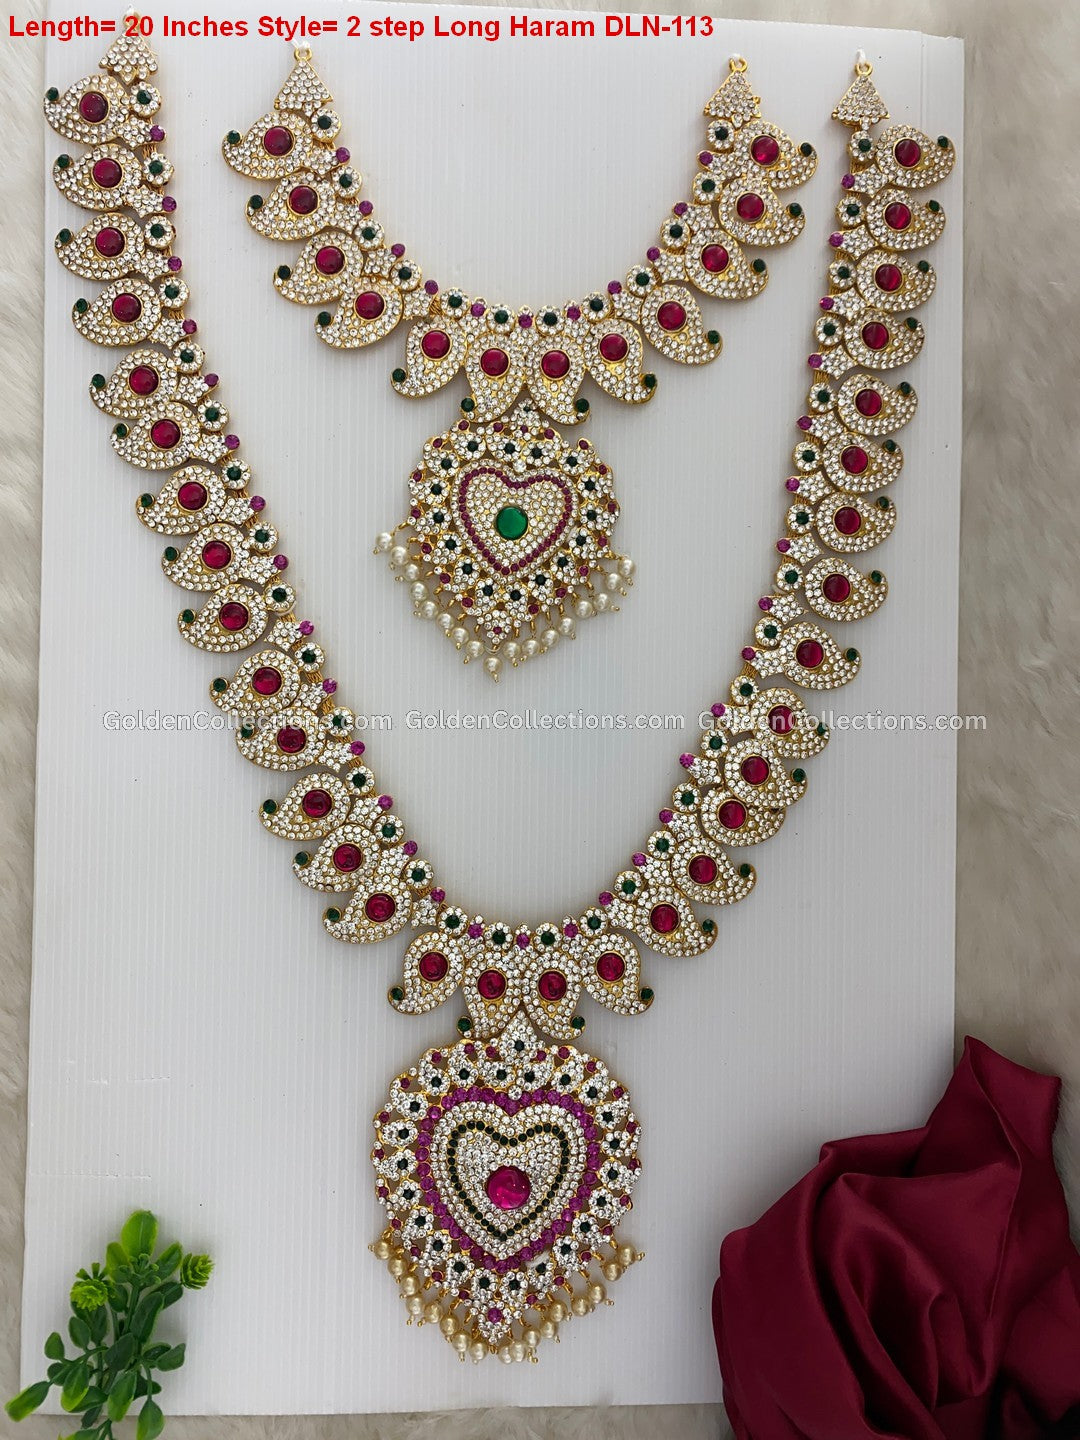 Exquisite Gold-Plated Deity Jewellery Set - DLN-113